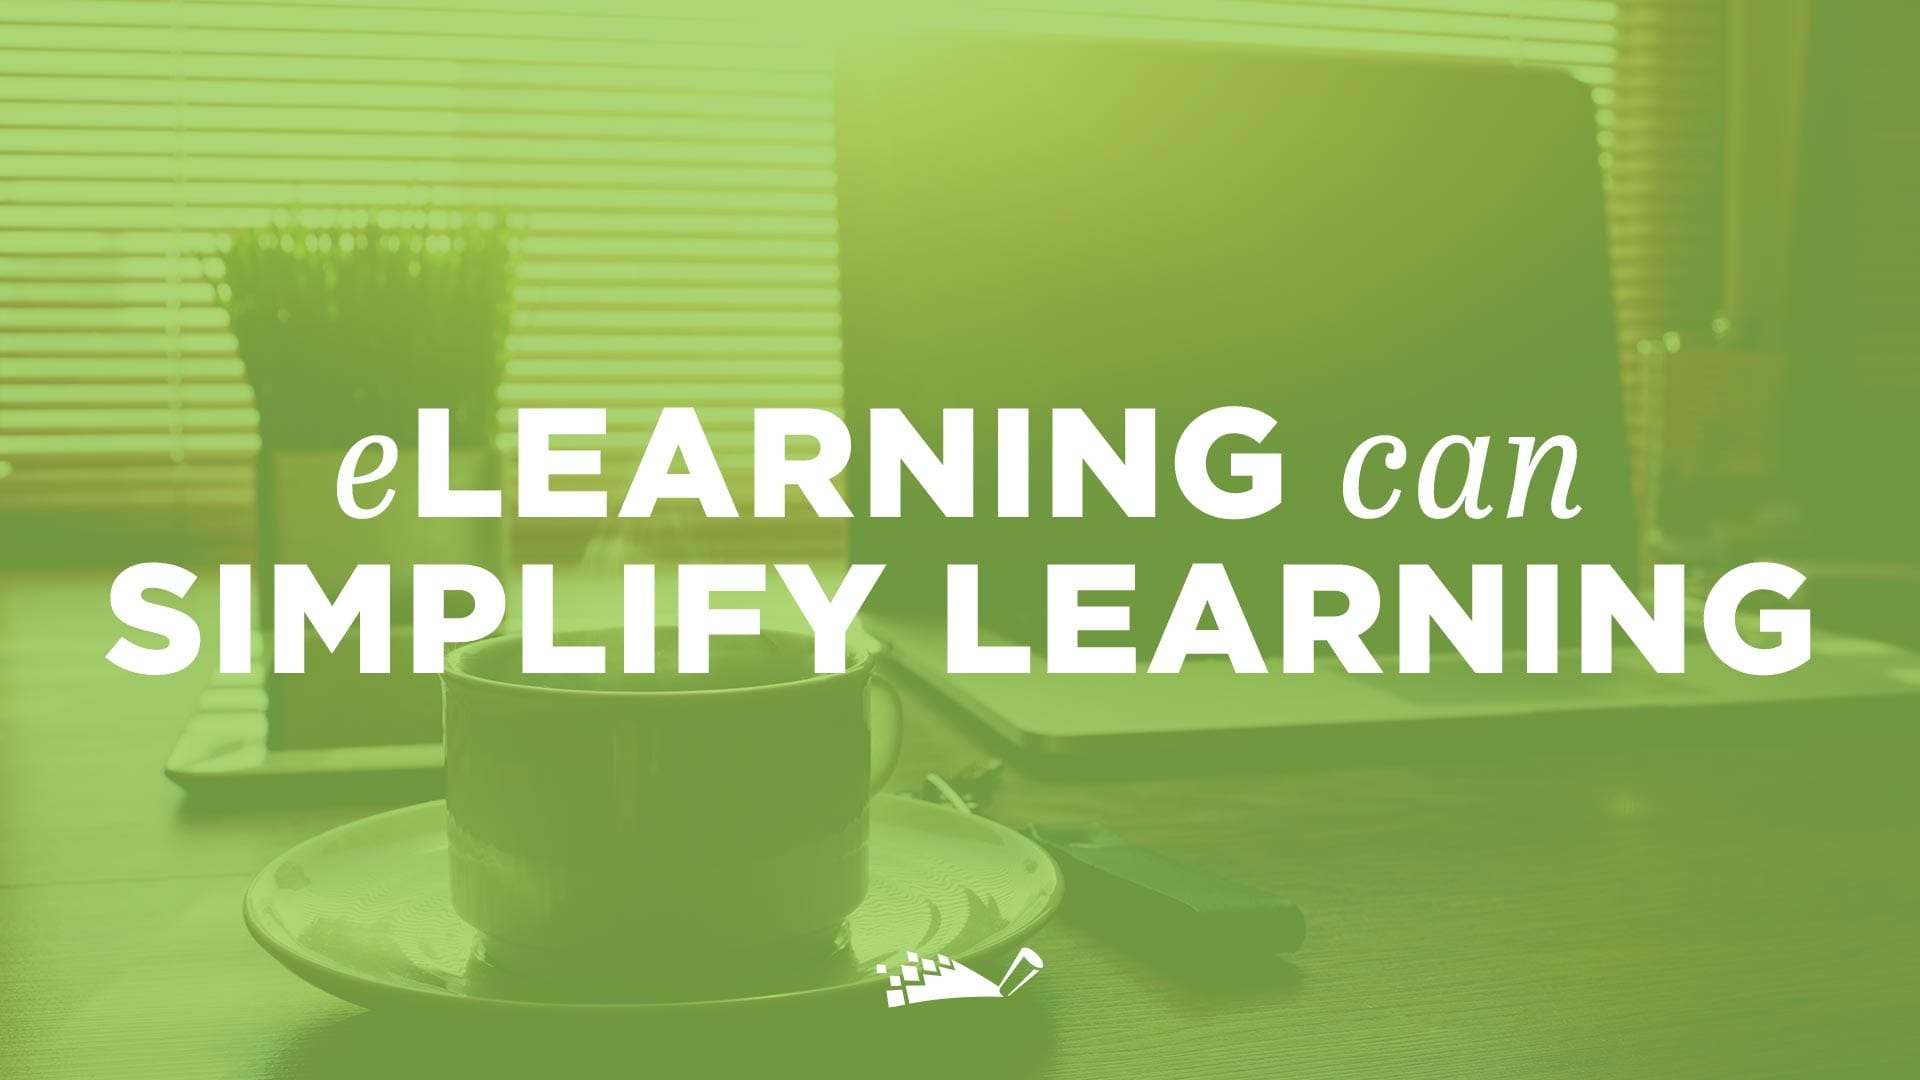 elearning-can-simplify-learning